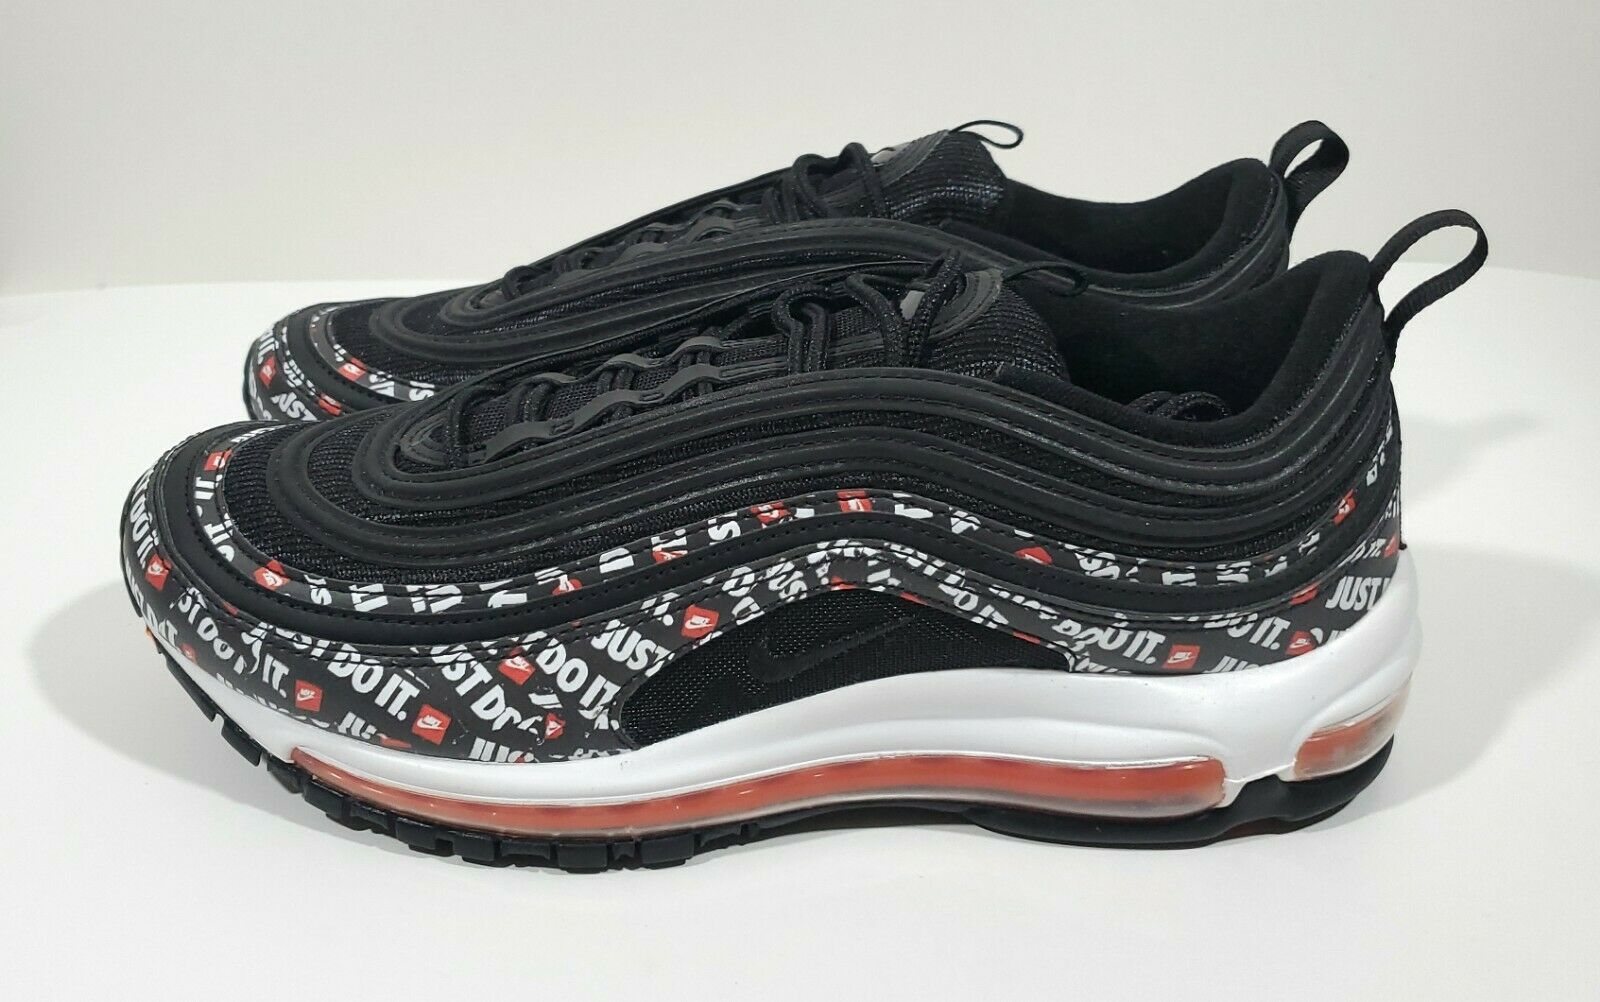 Nike Air Max 97 Just Do It Mens Running Shoes Black White Orange Size 9